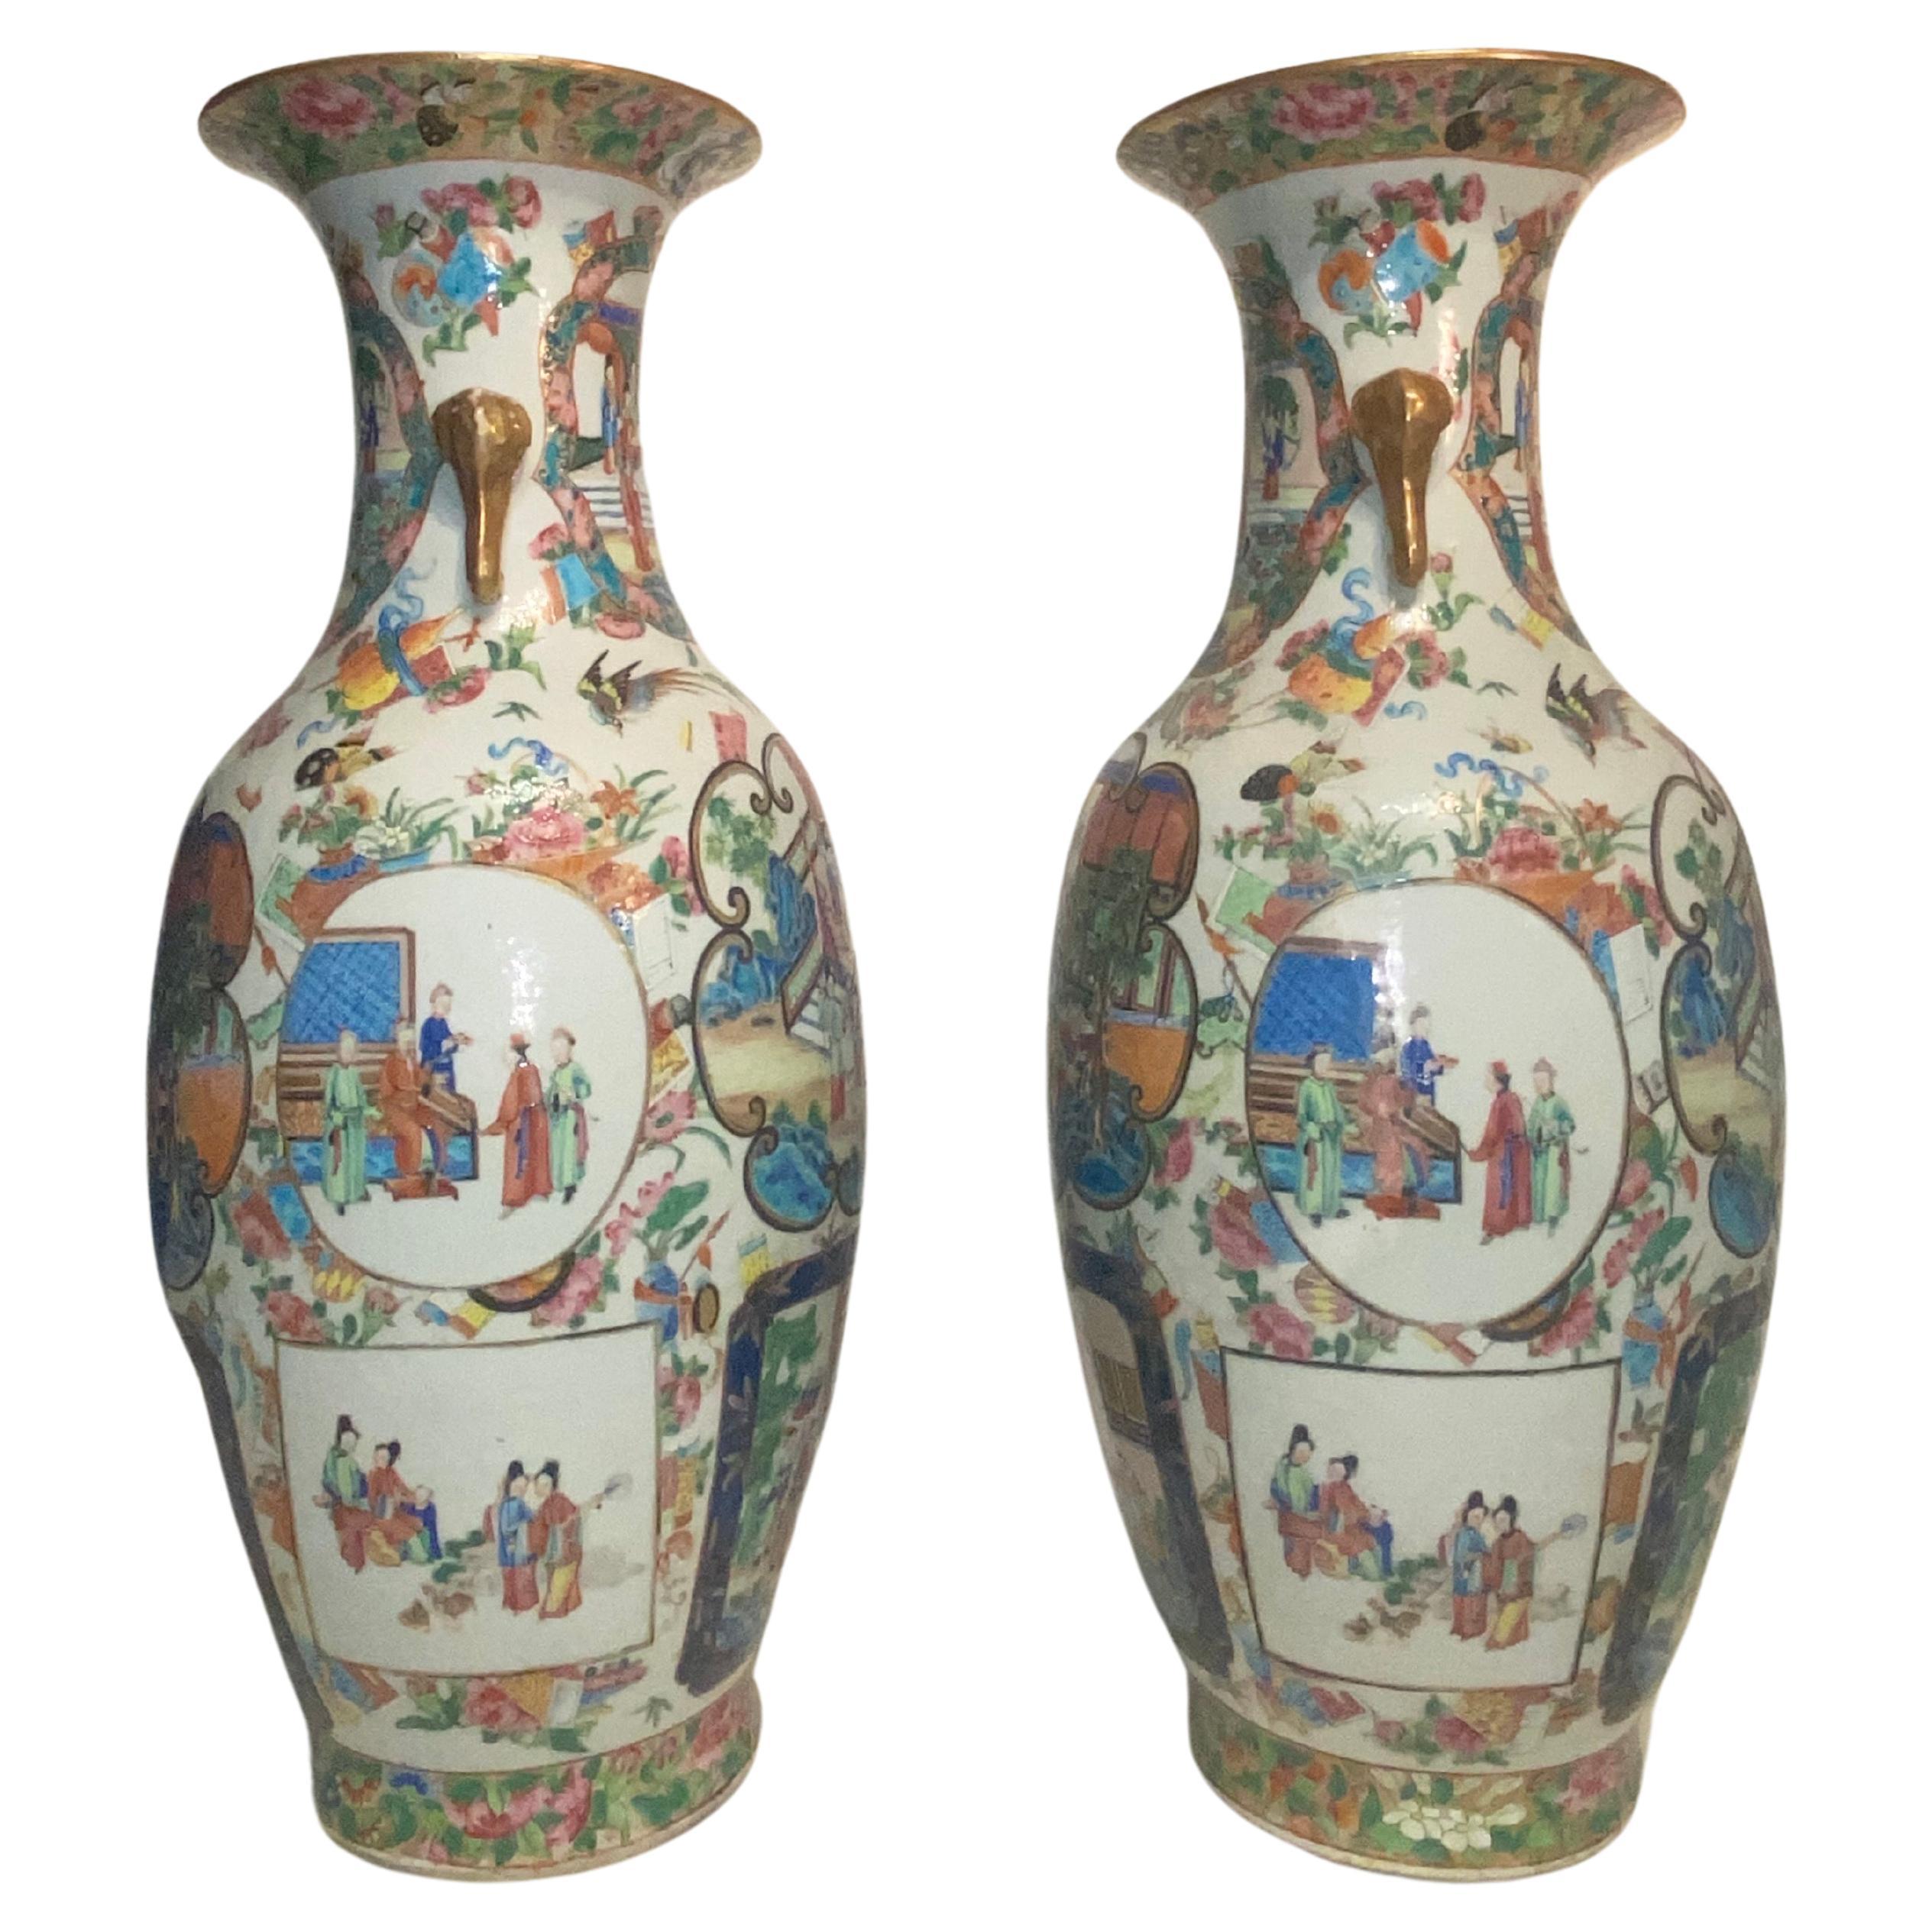 An impressive high quality pair of Cantonese Famille Rose medallion vases. Each having wonderful bold colours, the inset hand painted panels depicting interior scenes of courtiers and their attendants, bordered by classical motif, flowers and